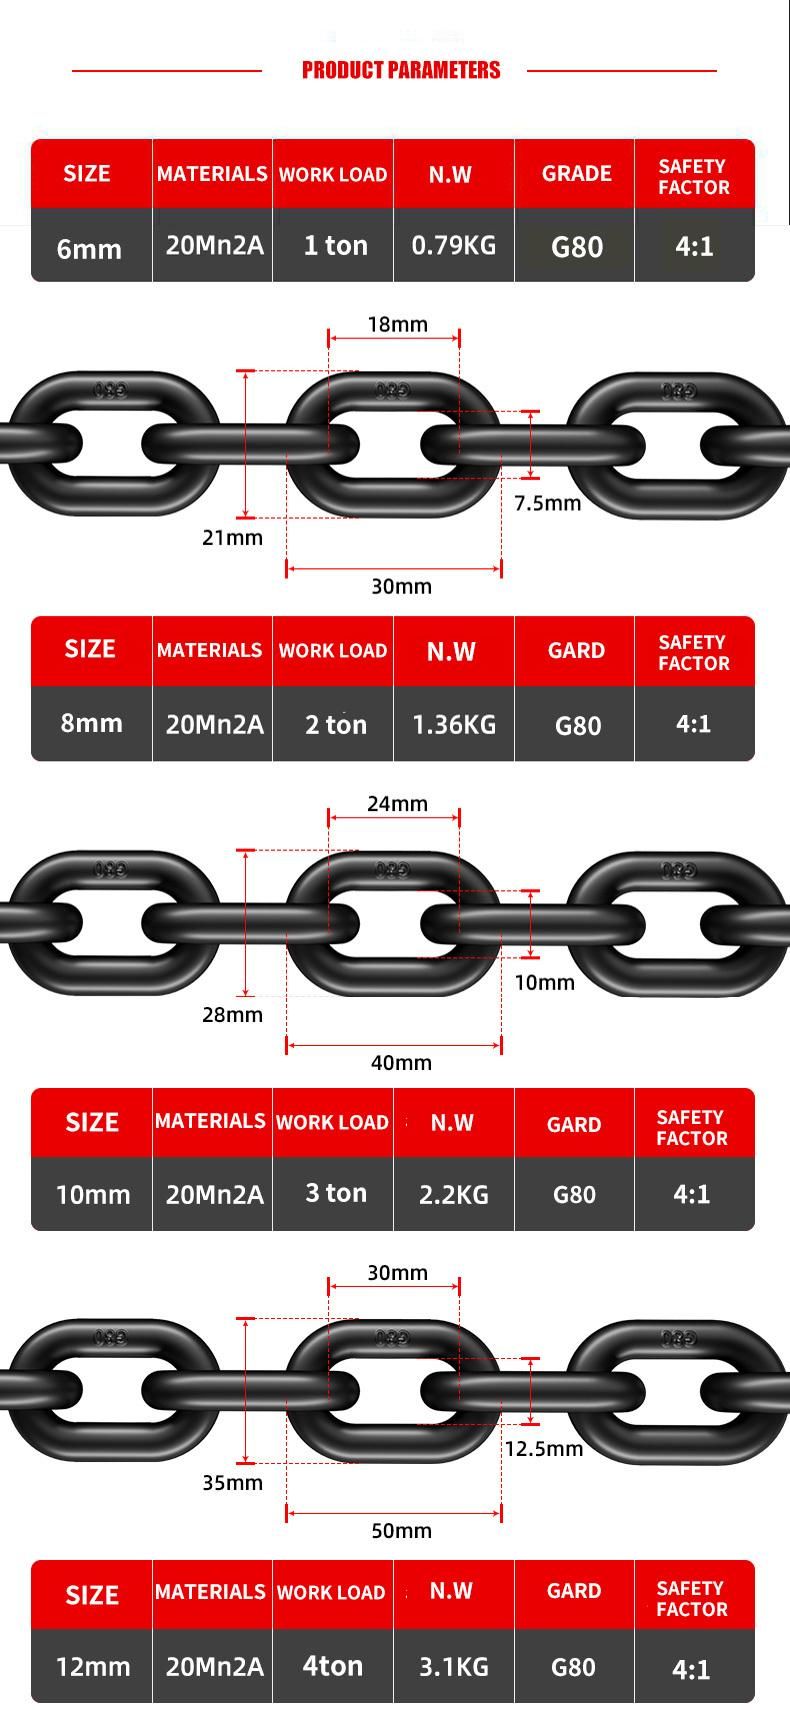 20mn2 Alloy Steel G80 Lifting Chain/En818-2 Link Chain/Hoisting Chain/Short Link Chain/Black Chain/Load Chain